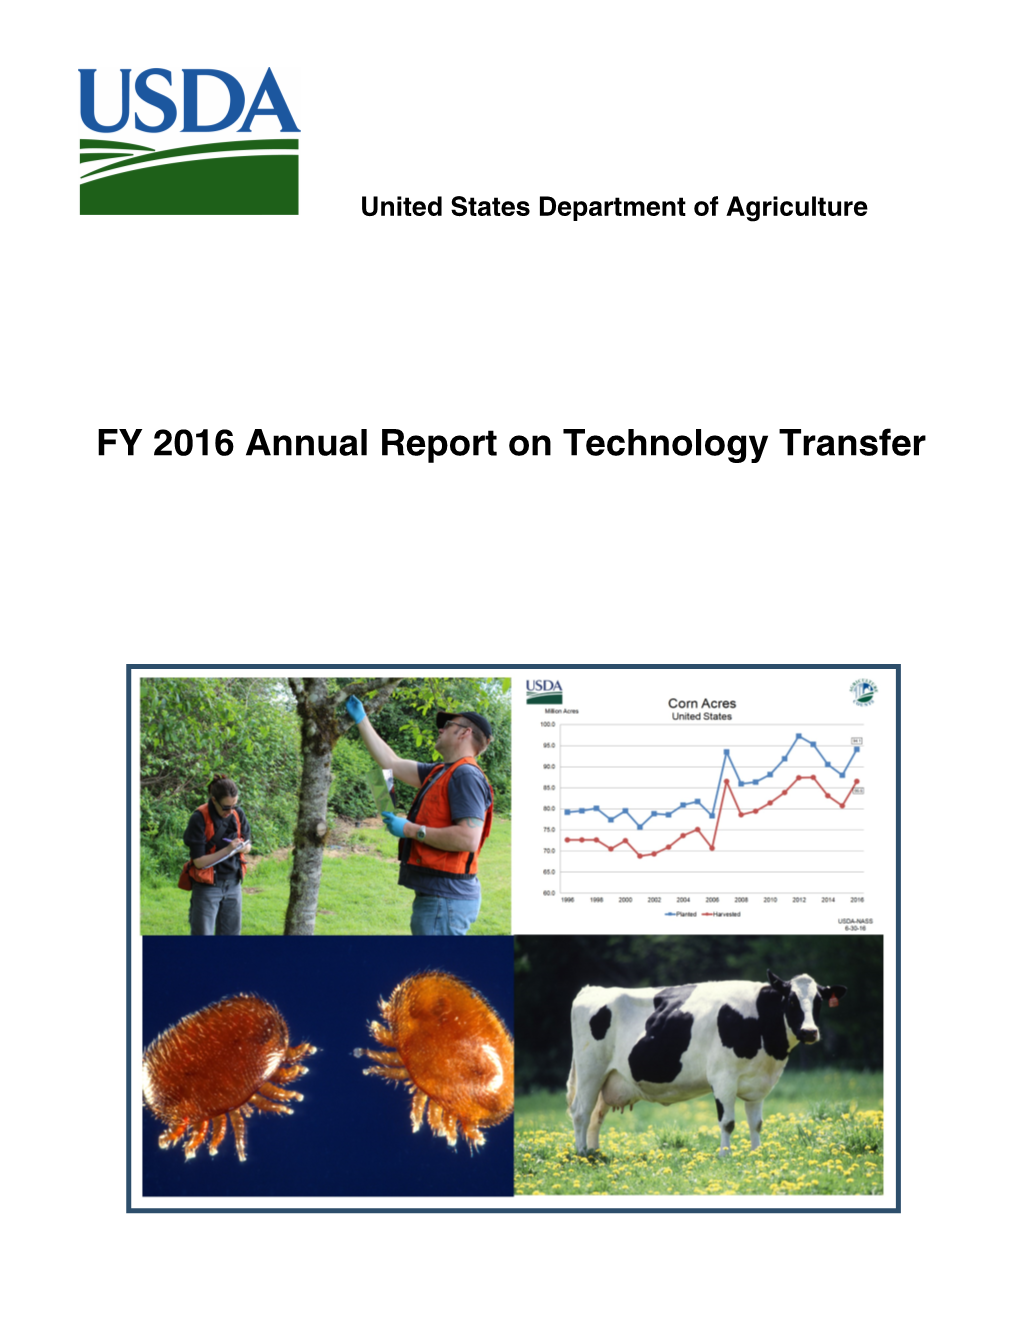 FY 2016 Annual Report on Technology Transfer